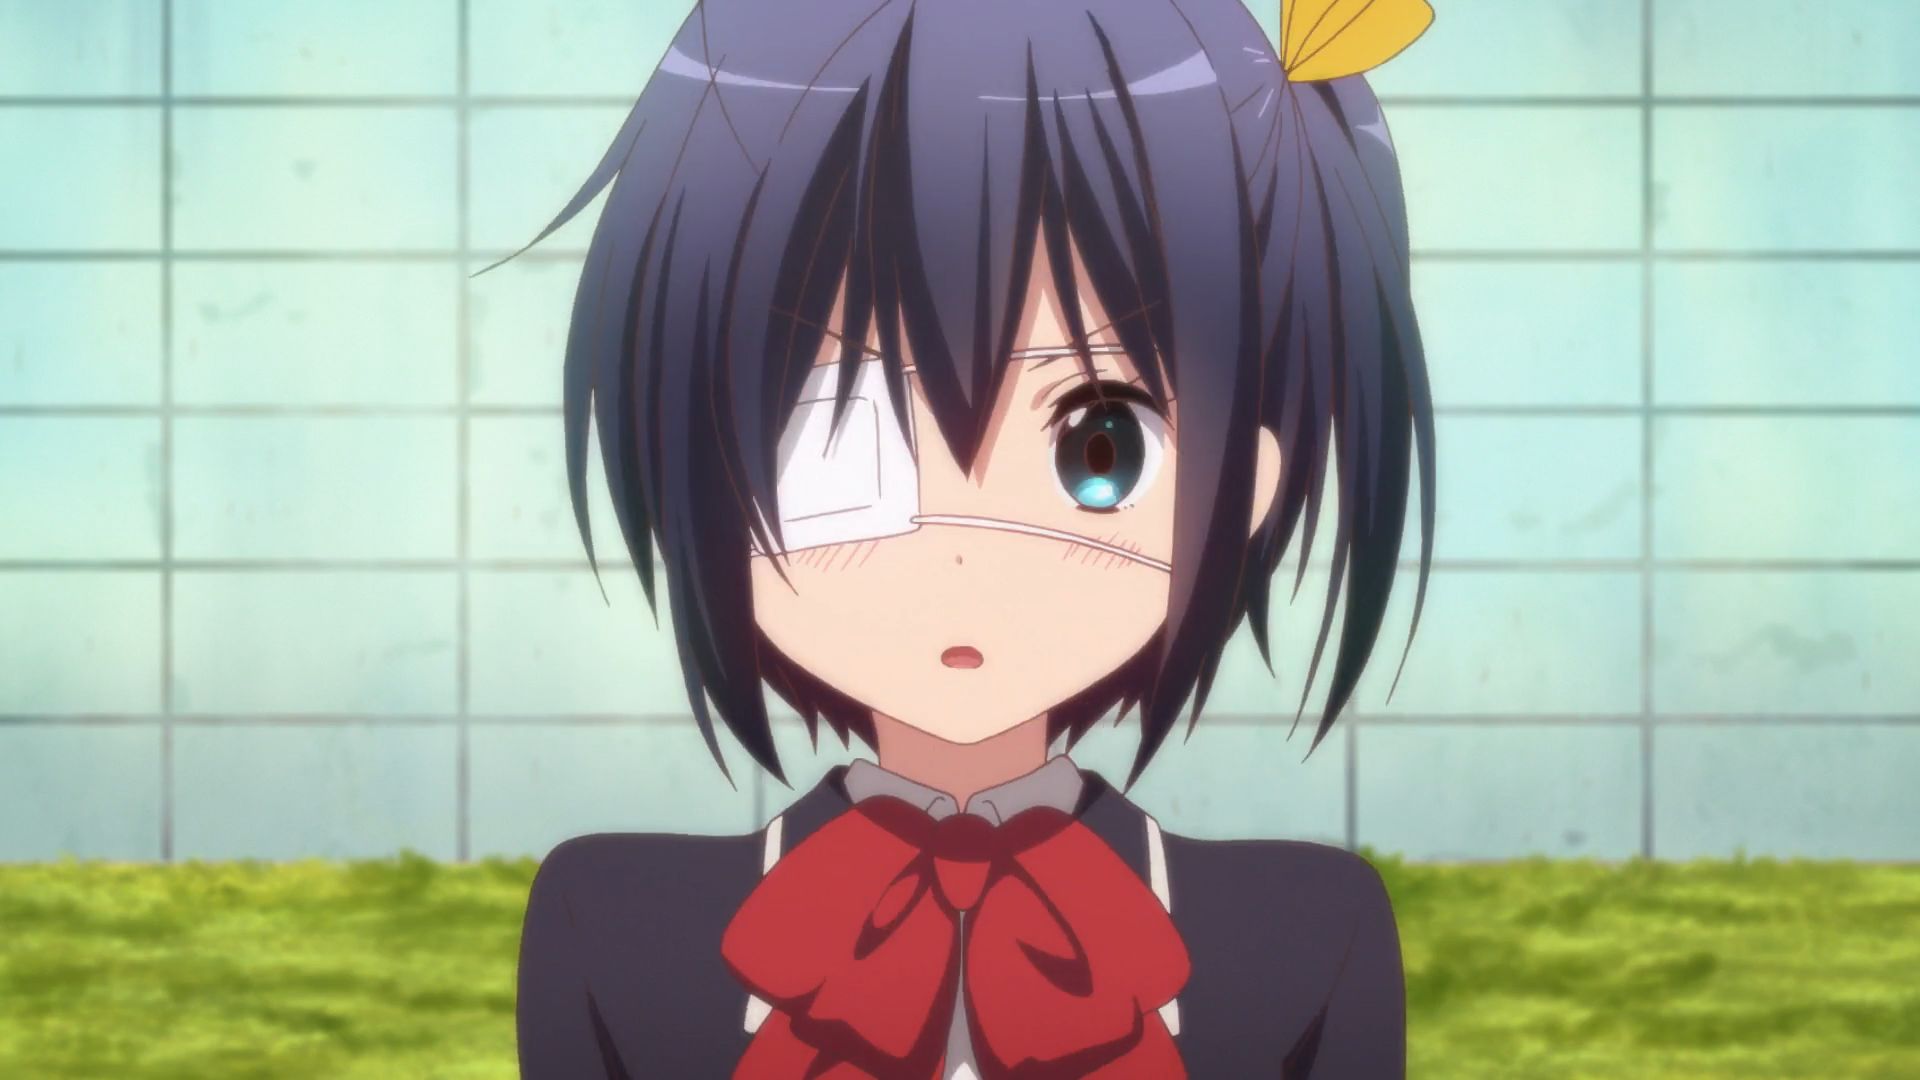 Rikka Takanashi from Love, Chunibyo, and Other Delusions is one of the cute anime girls. 